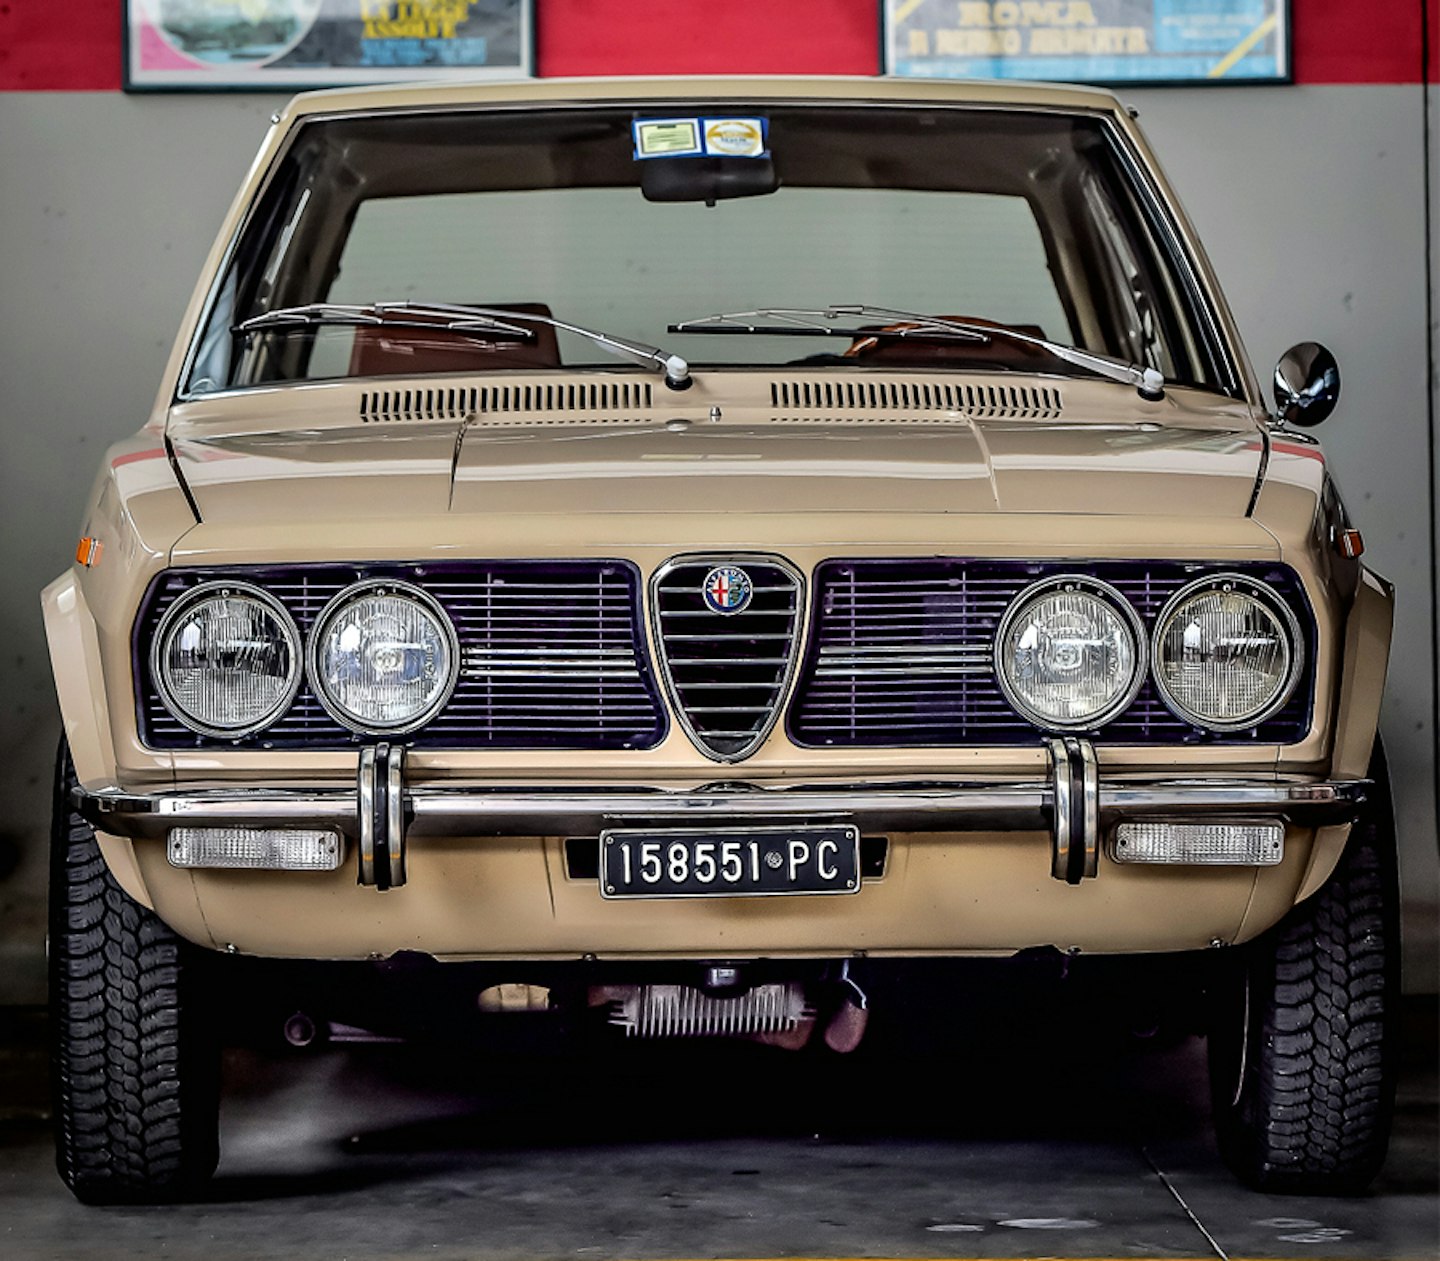 Love At First Sight - The Restoration Of A 1969 Alfa Romeo GT